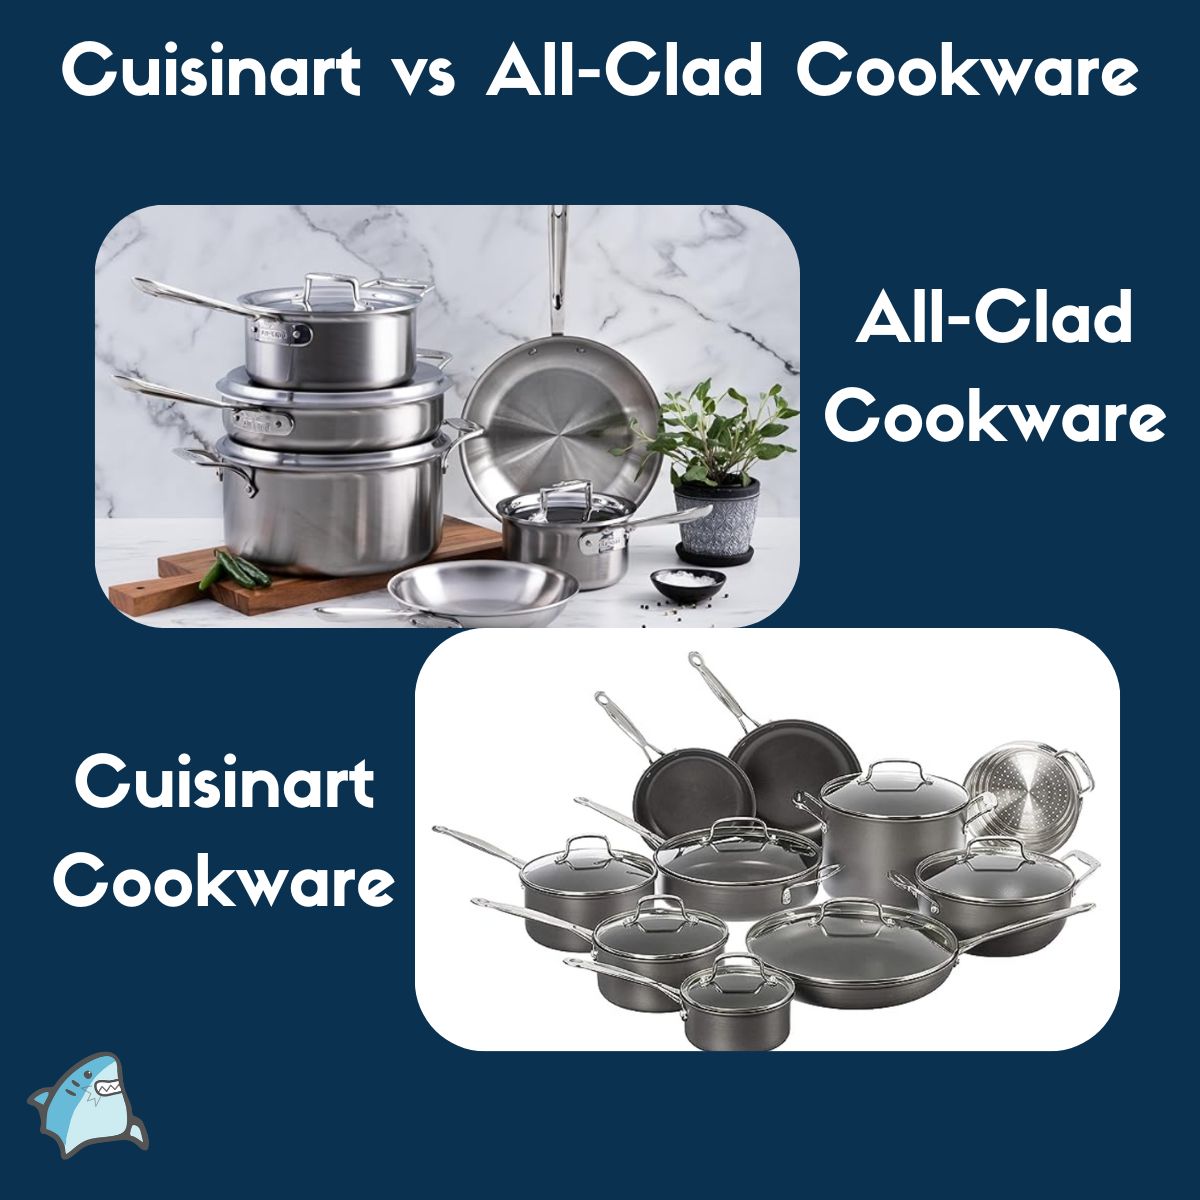 Cuisinart Vs All-Clad Cookware - All Day I Eat Like A Shark